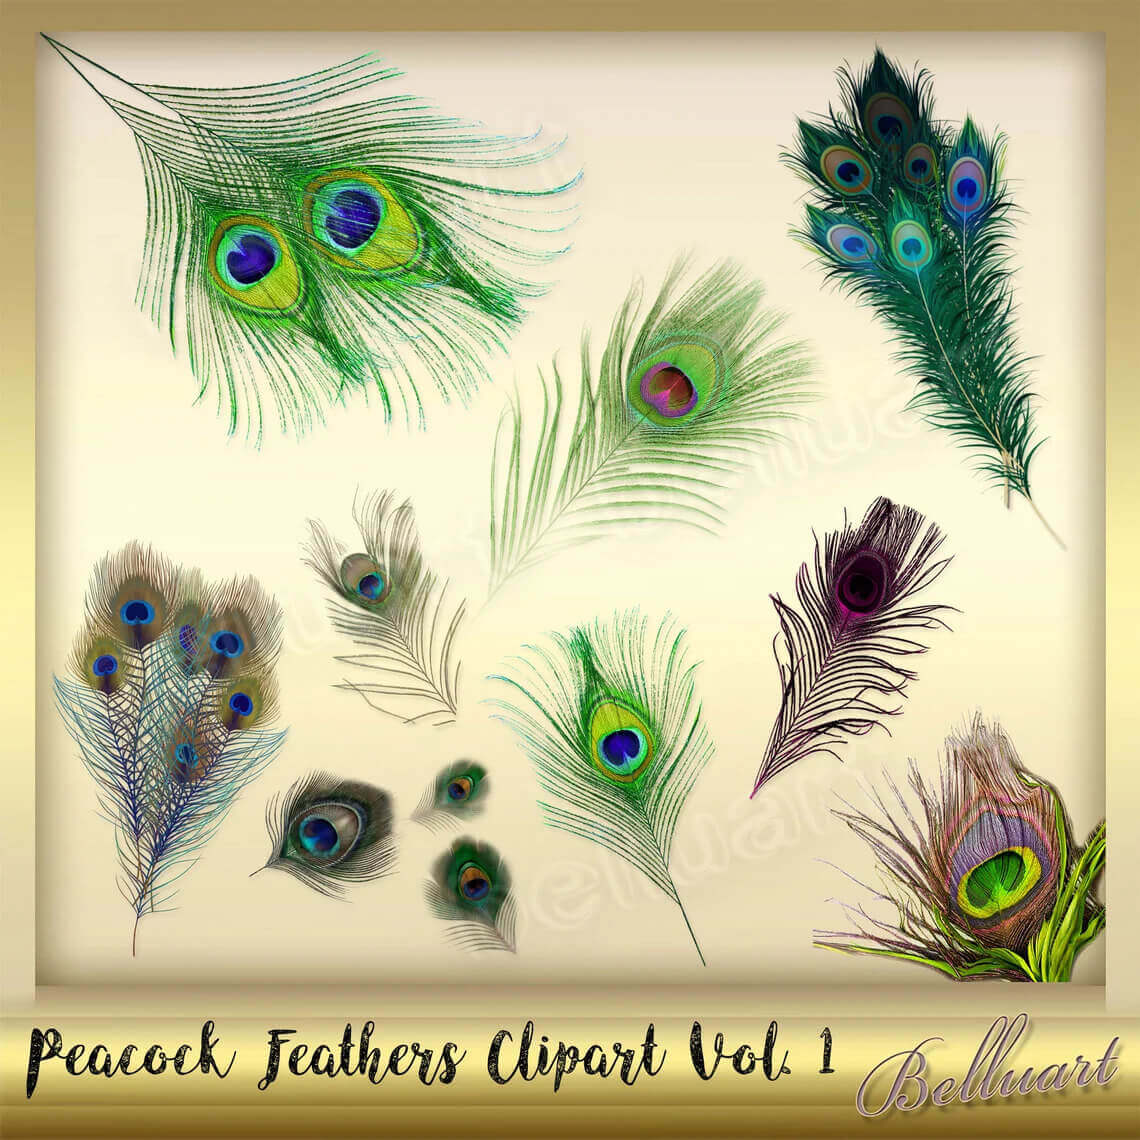 Picture of peacock feathers clipart vol 1.